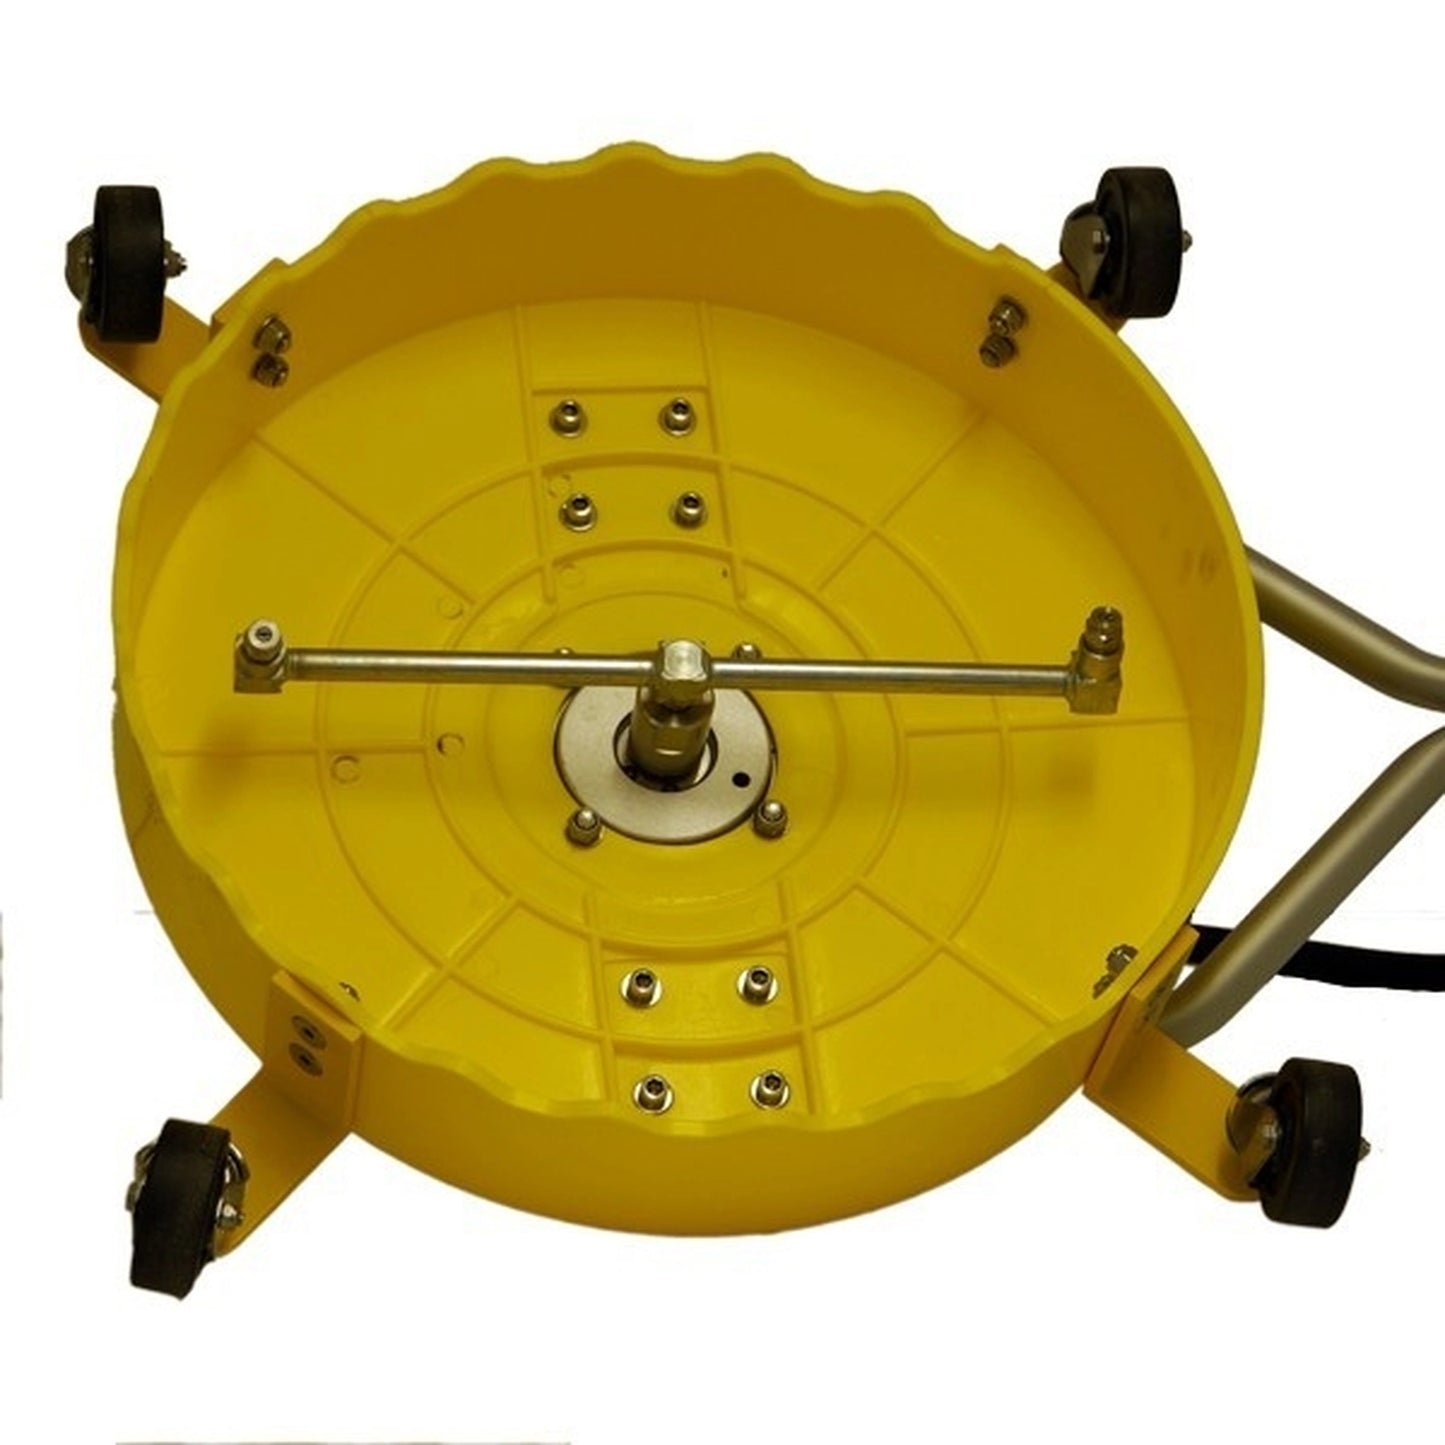 BE Pressure 85.403.005 Whirlaway Rotary Flat Surface Cleaner 18"